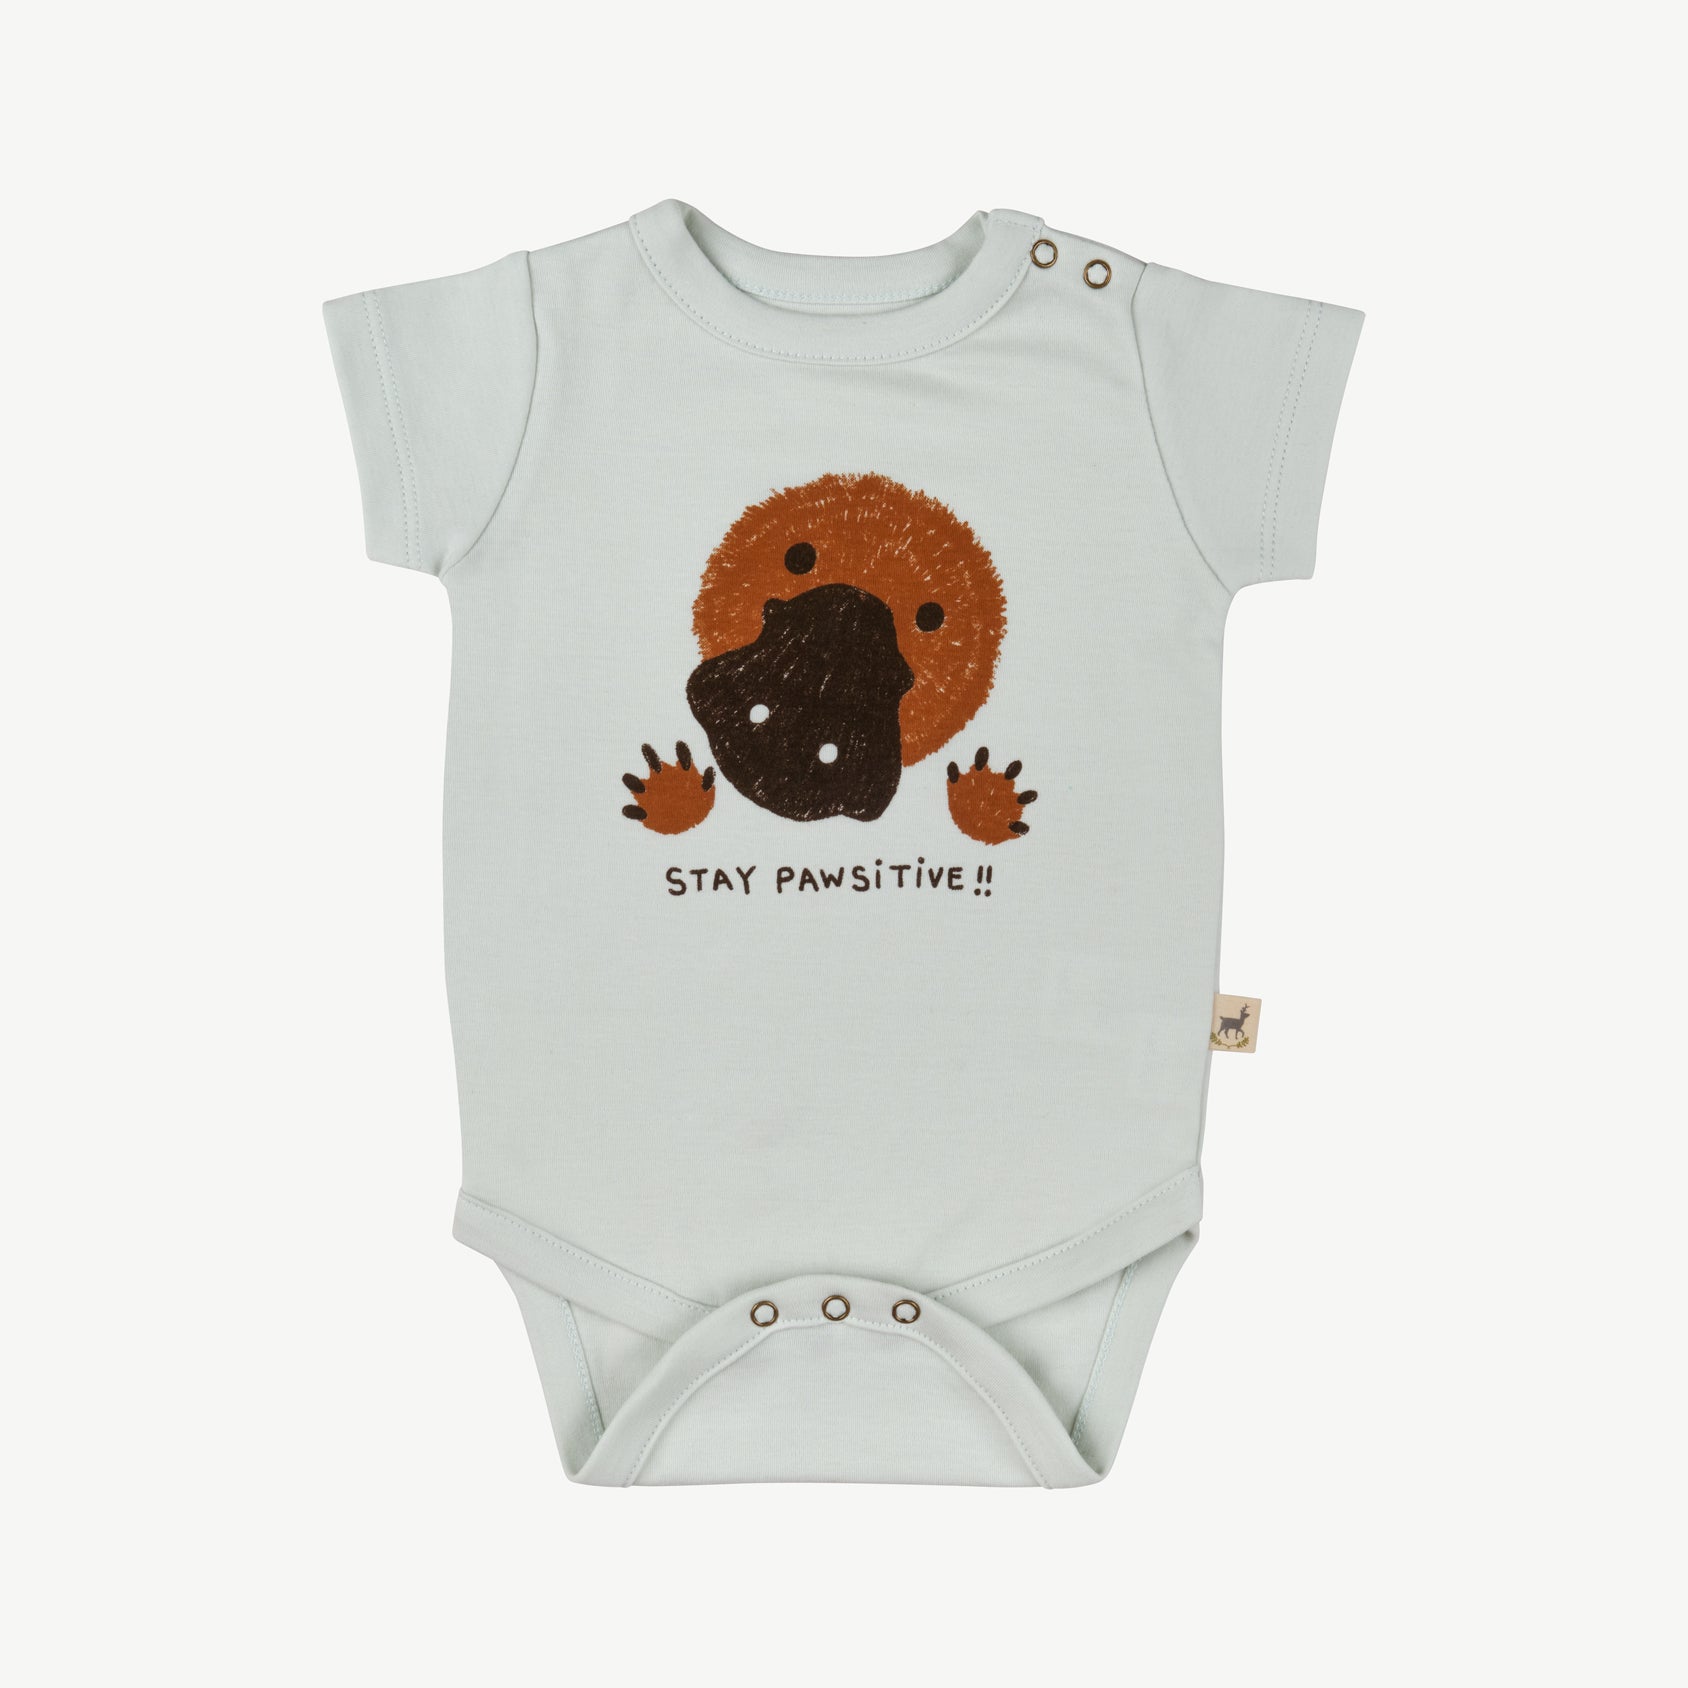 'stay pawsitive!!' ice flow onesie + pants baby outfit